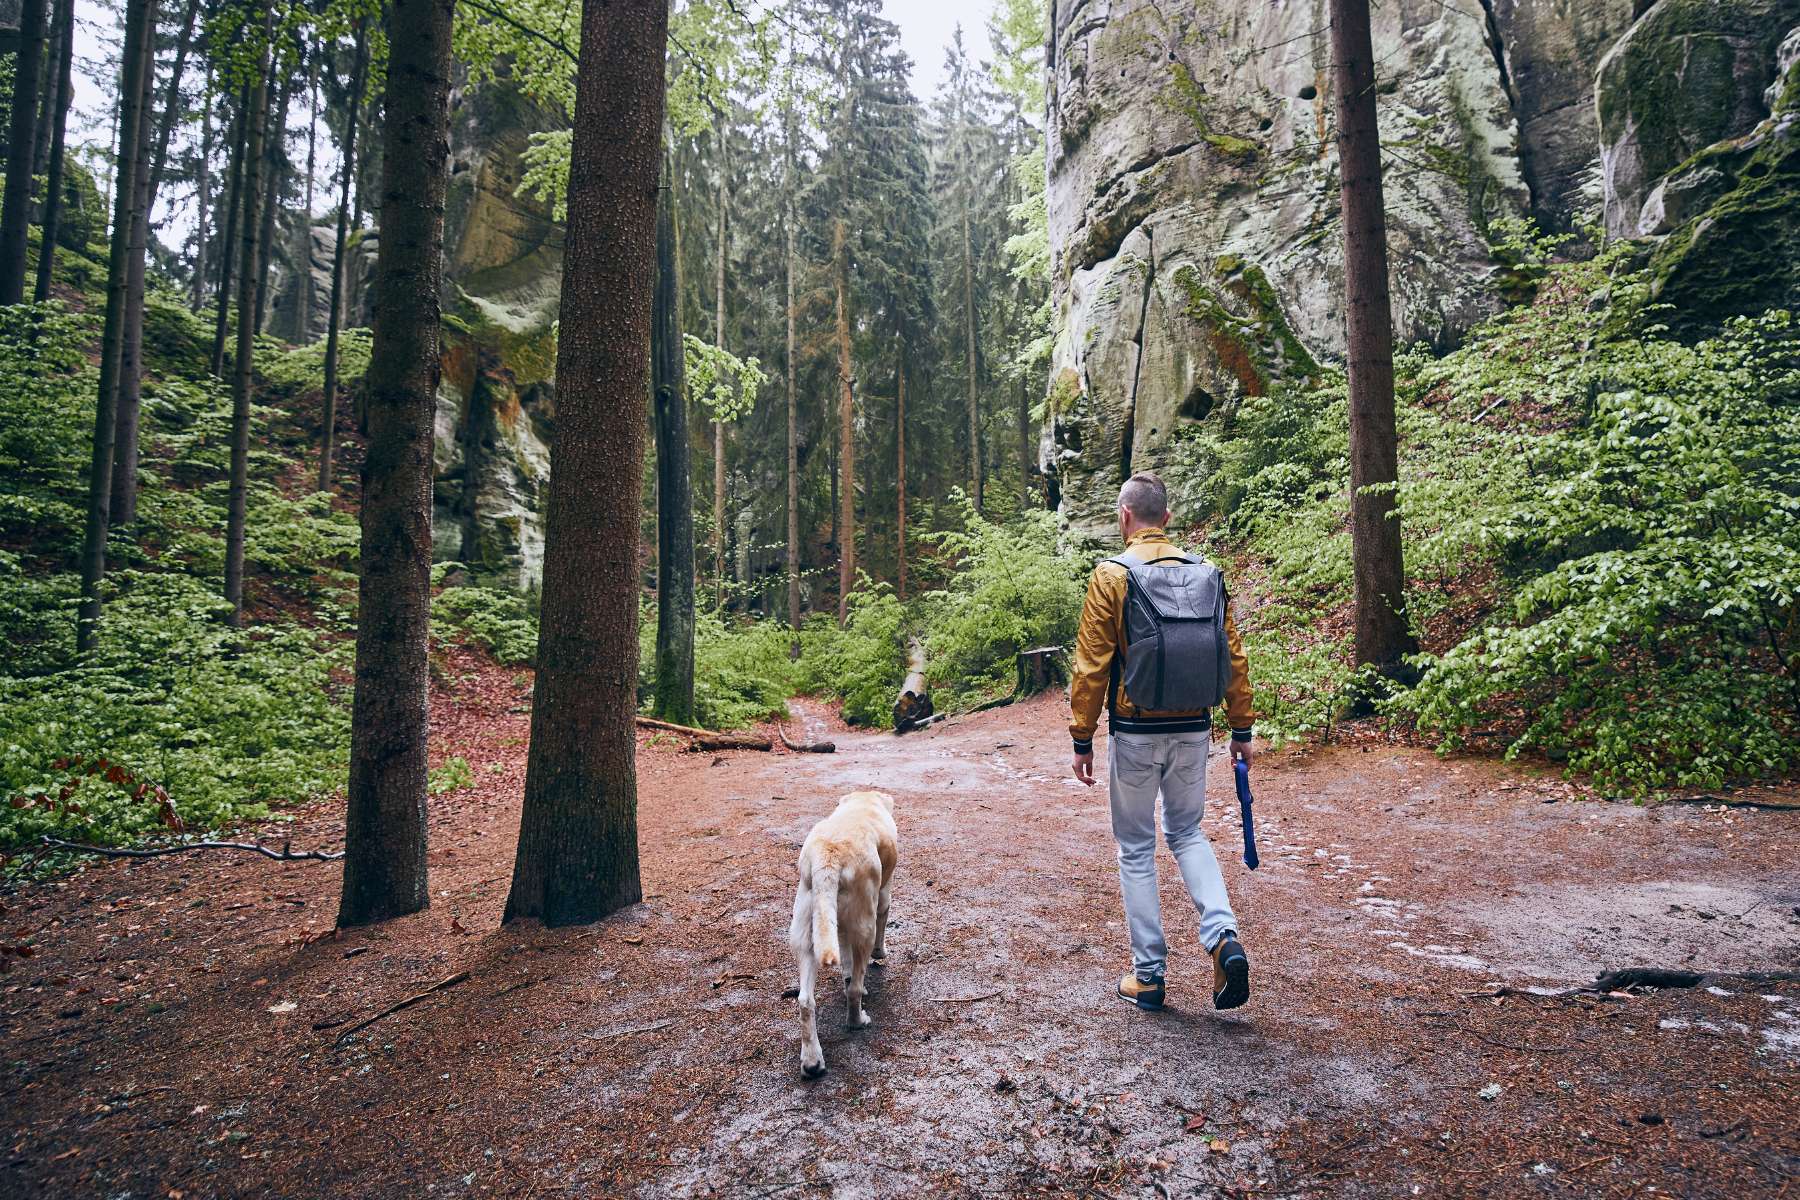 From Couch Potato to Trail Blazer: Finding an Active Companion